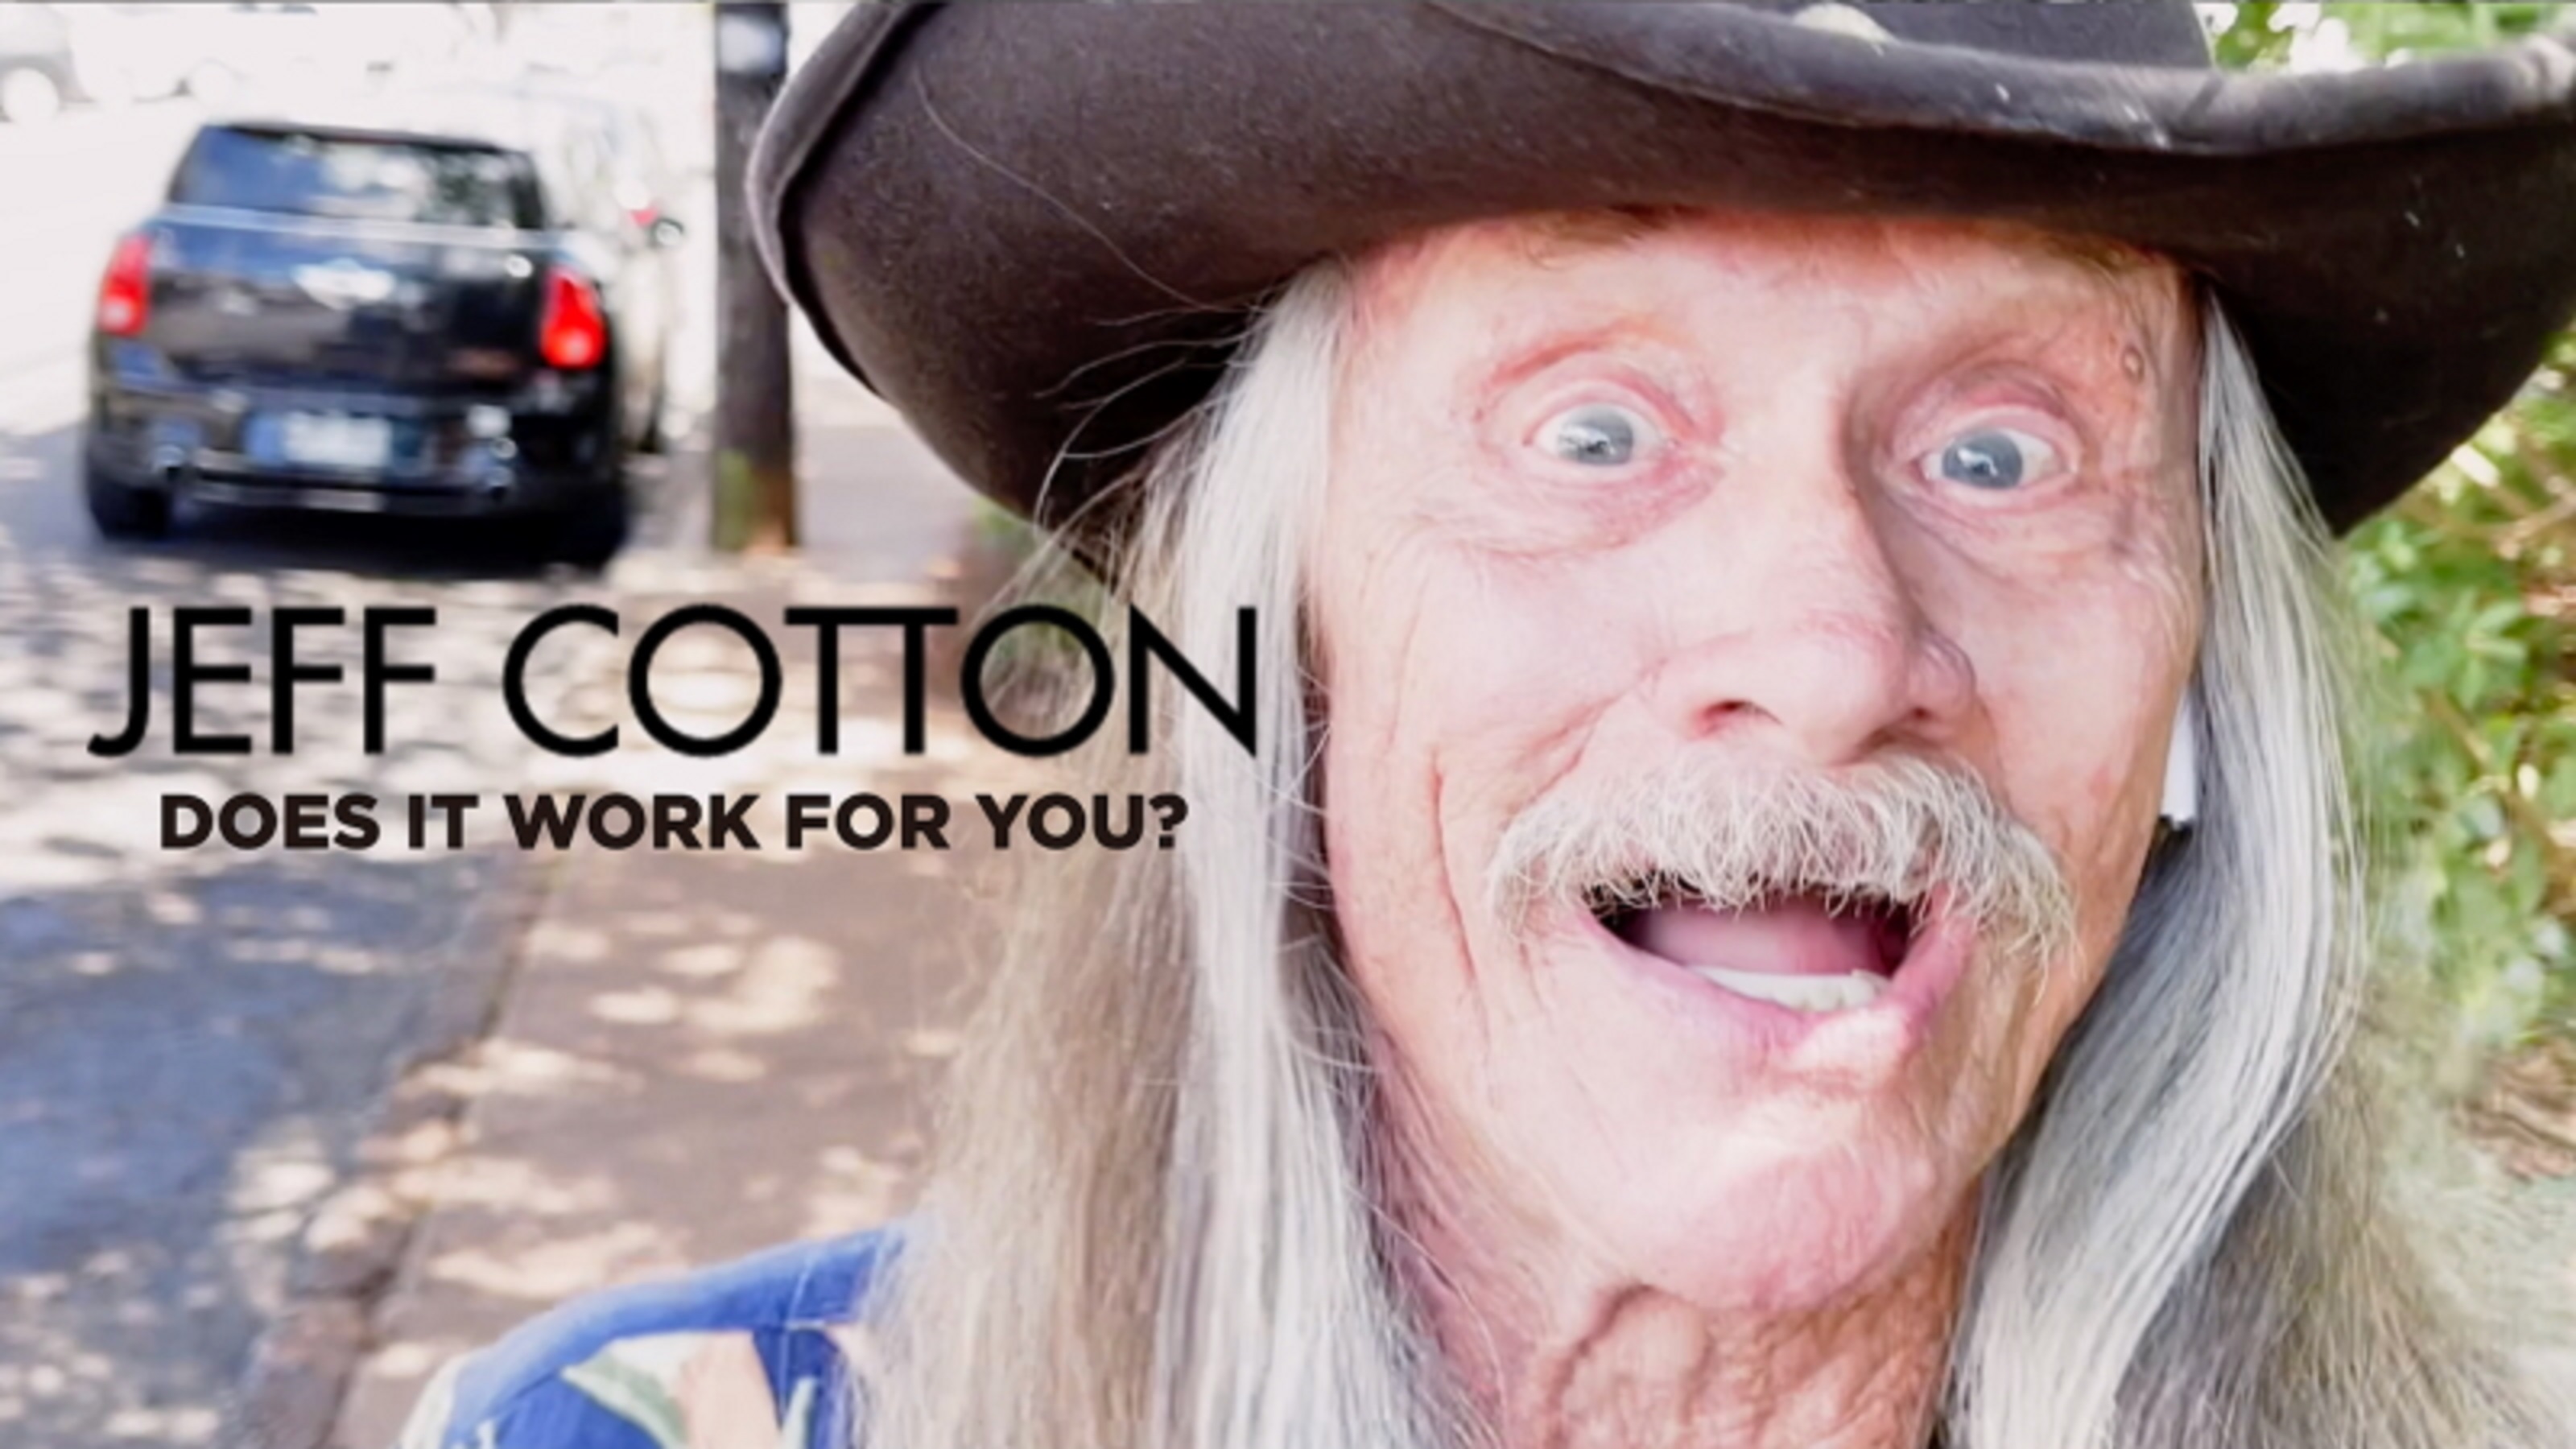 Captain Beefheart Guitar legend Jeff Cotton Releases Single and Video for “Does It Work For You”